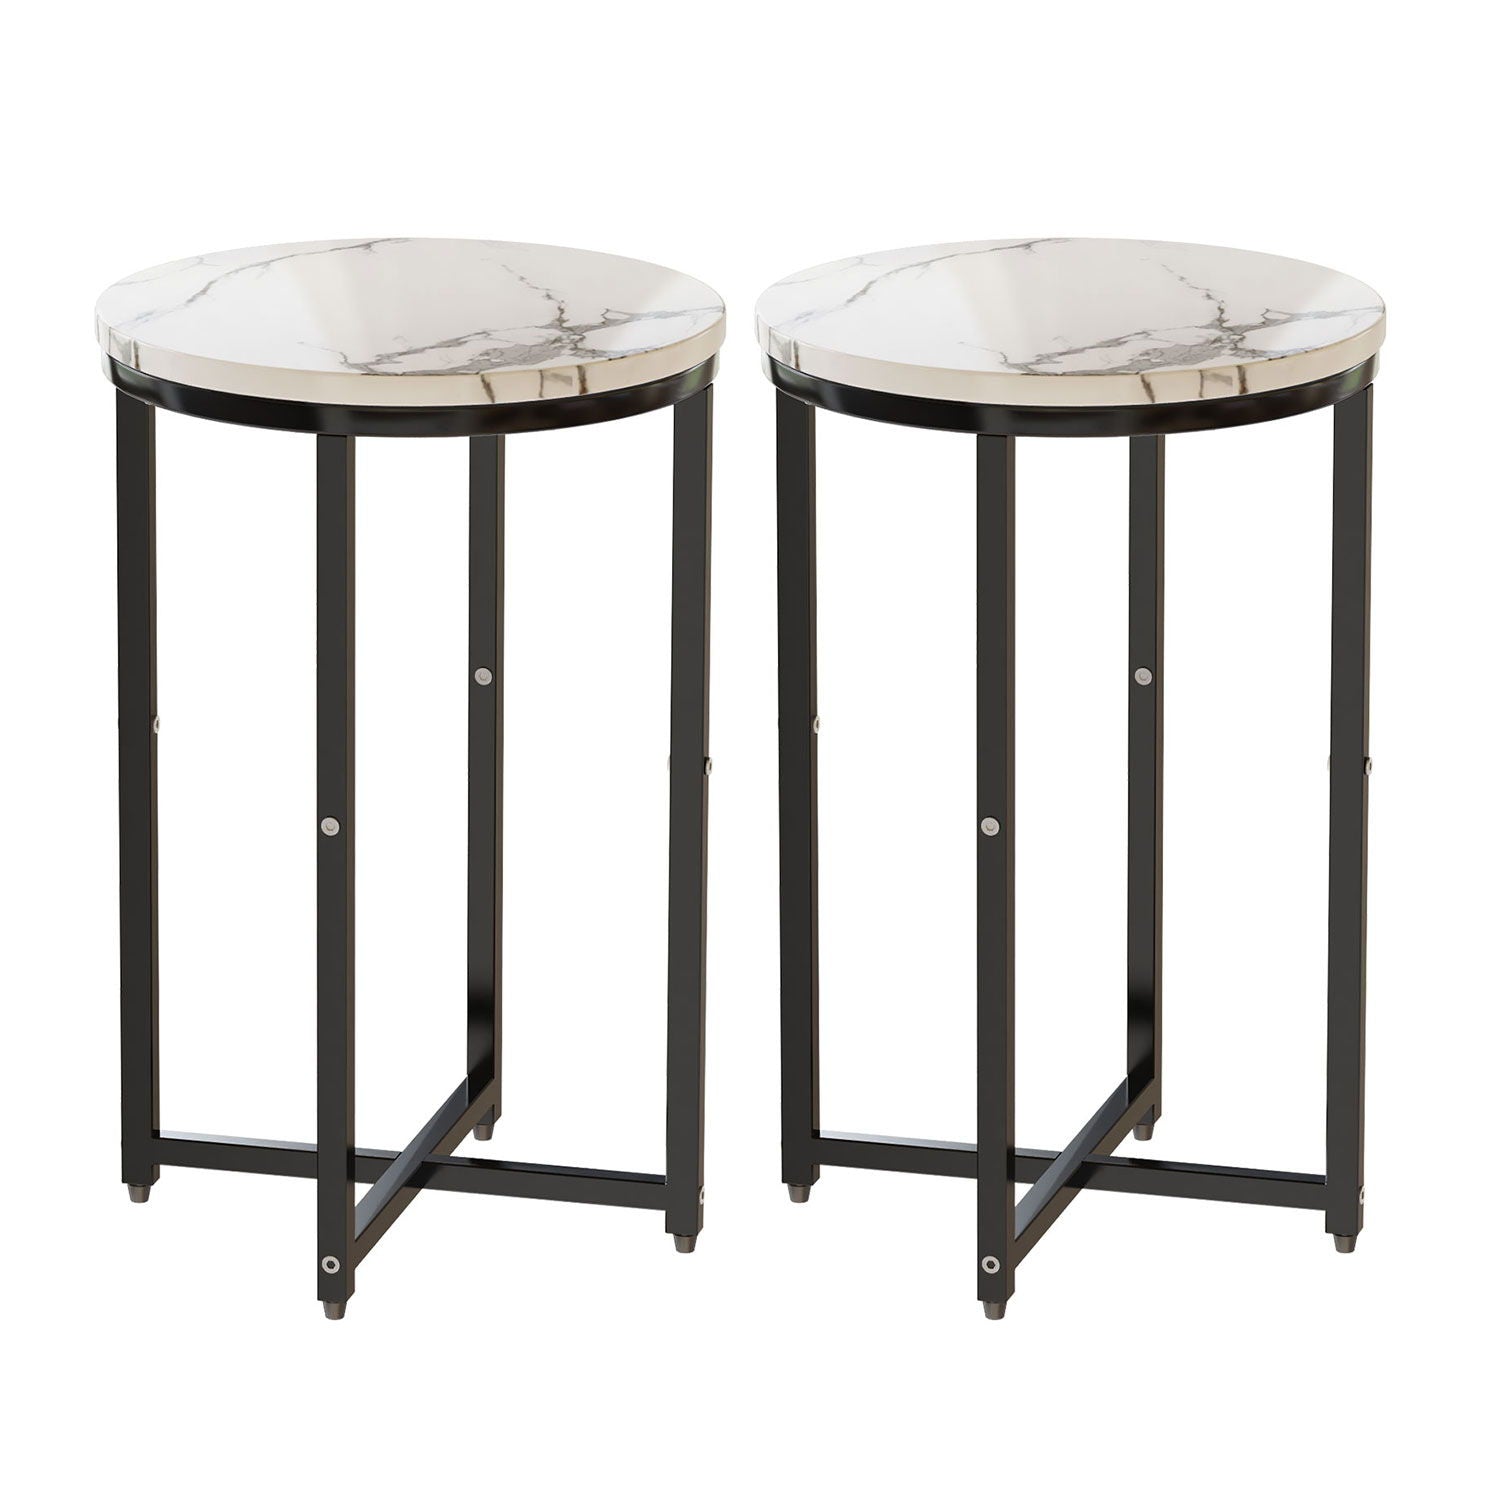 (Set of 2) Round End Side Table With Faux Marble Top And Metal Frame For Bedroom Balcony Small Space Modern Home Decor - Black